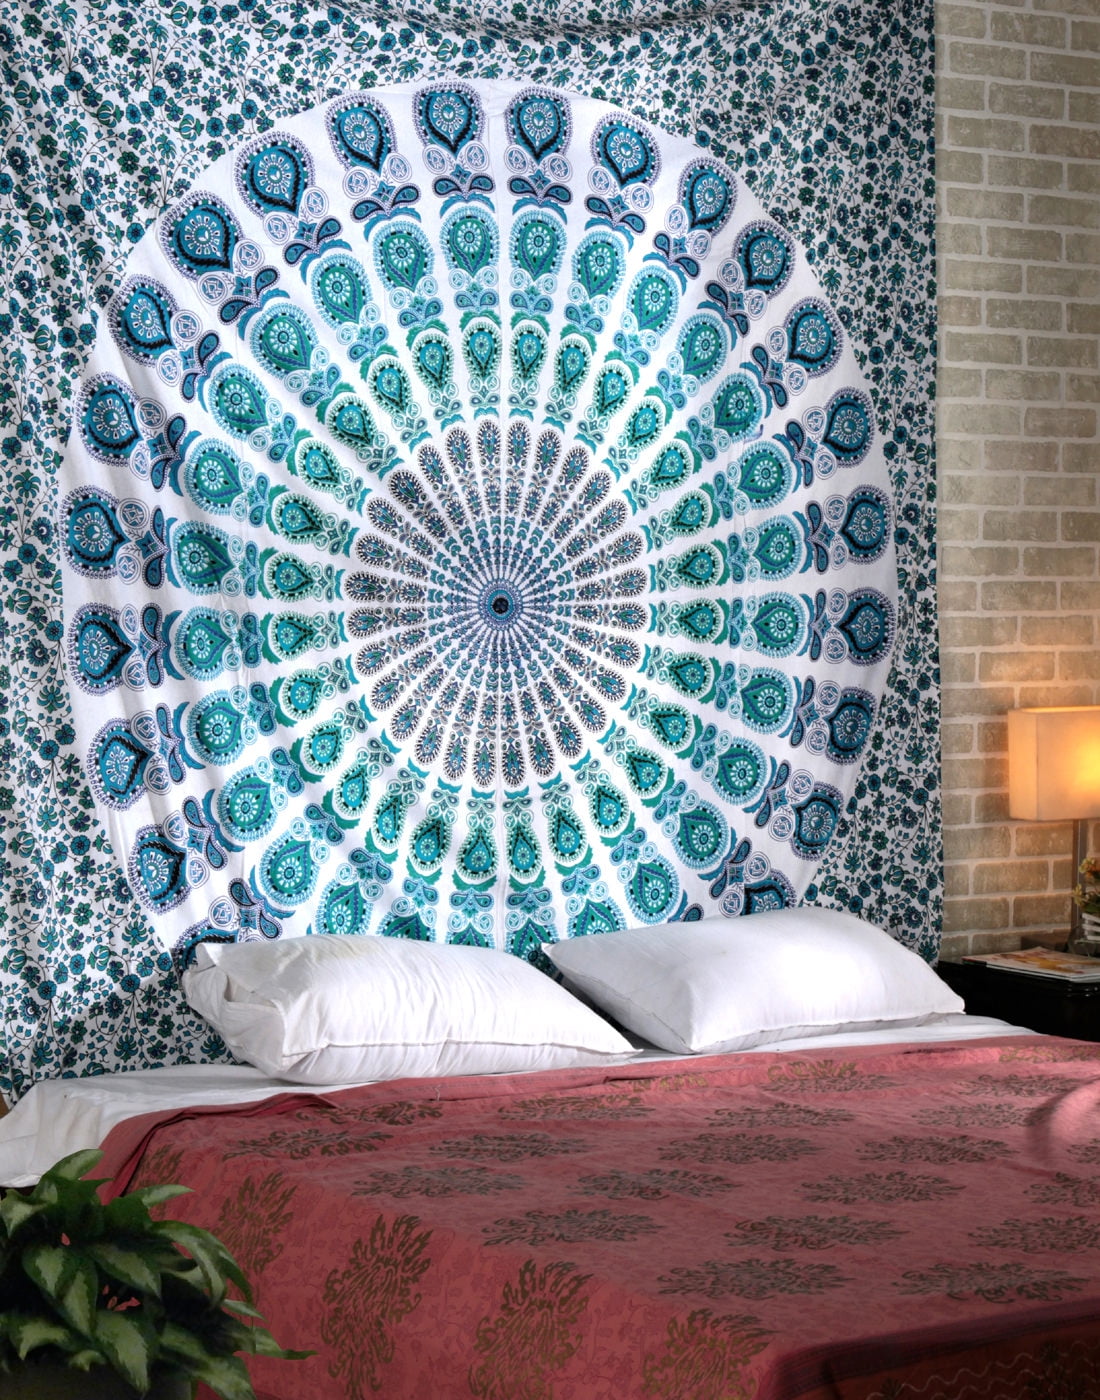 Details about   Indian New Tapestry Wall Hanging Home Decor Hippie Mandala Bohemian Bedspread 